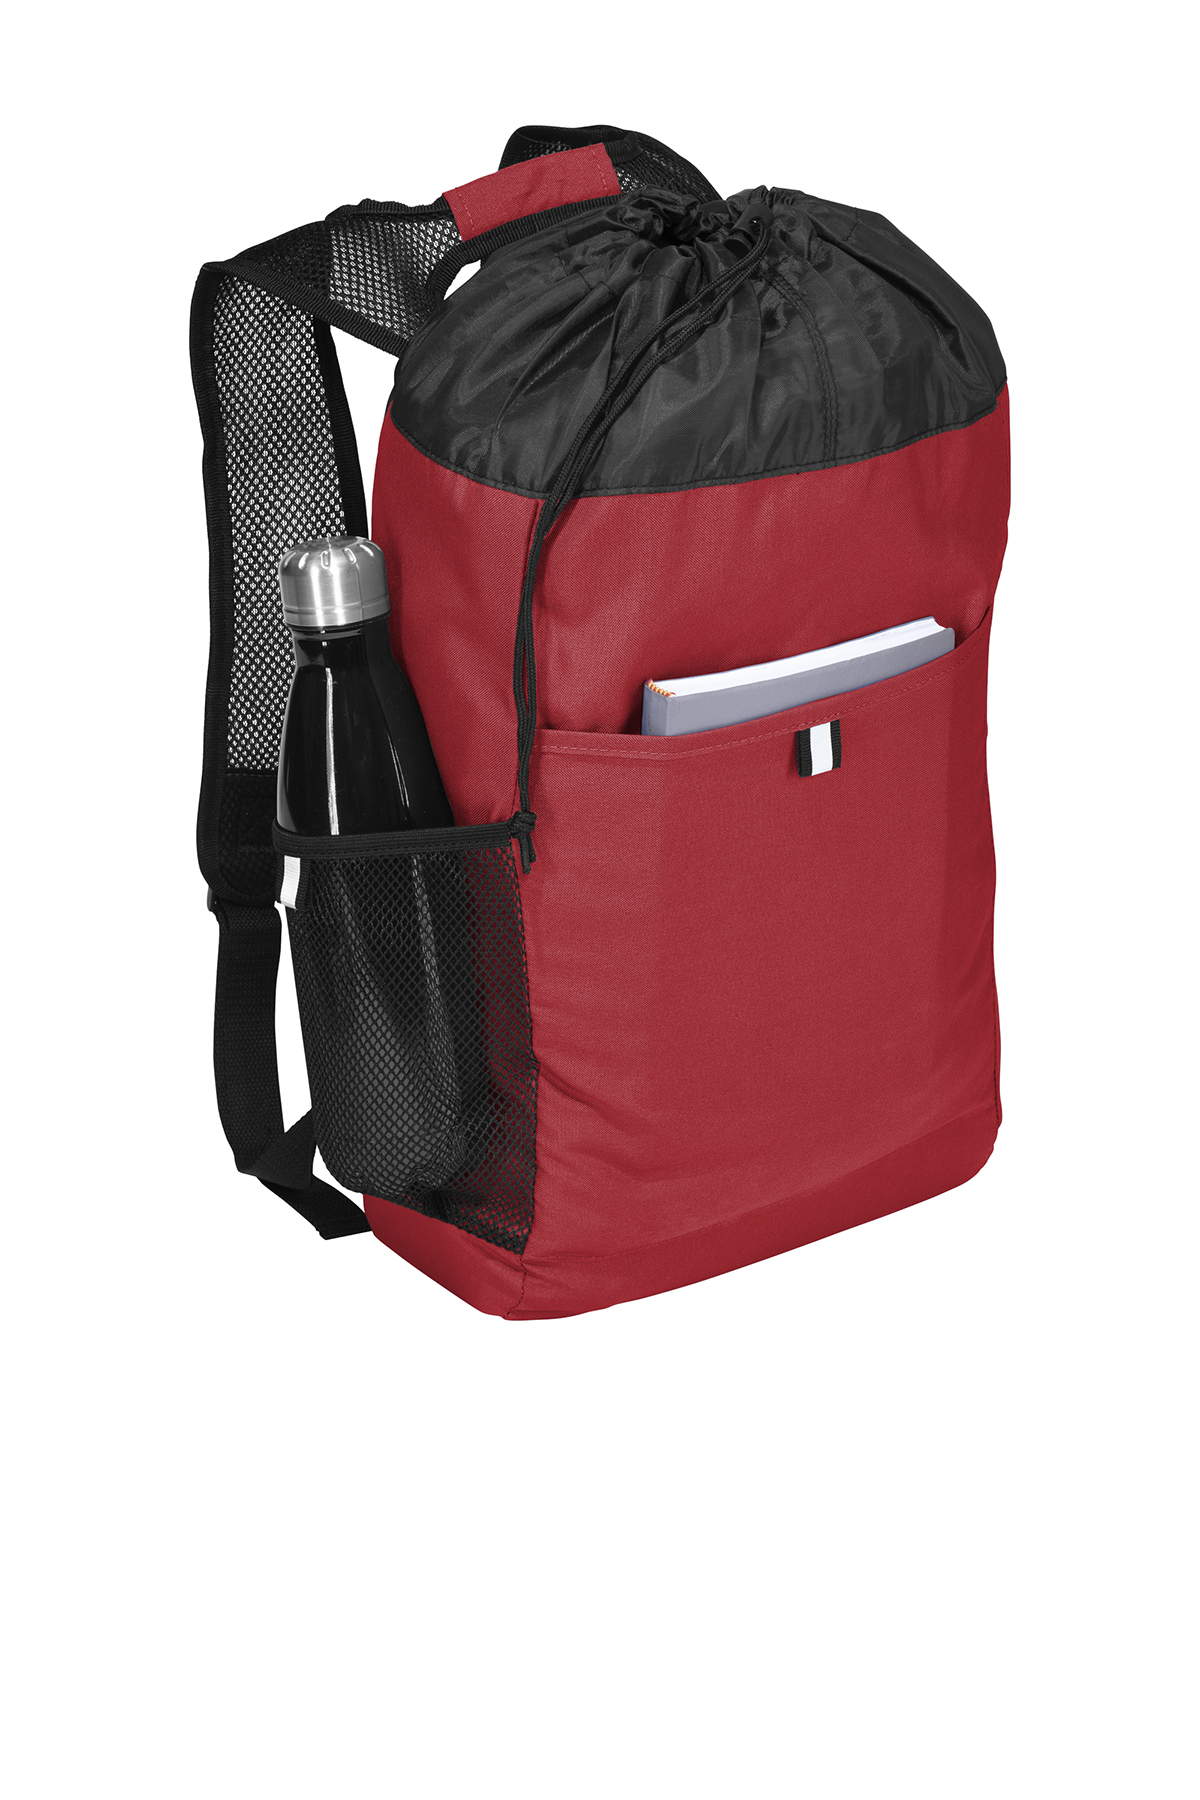 Port Authority Adult Unisex Plain Backpack Chili Red/Blk One Size Fits All - image 2 of 2